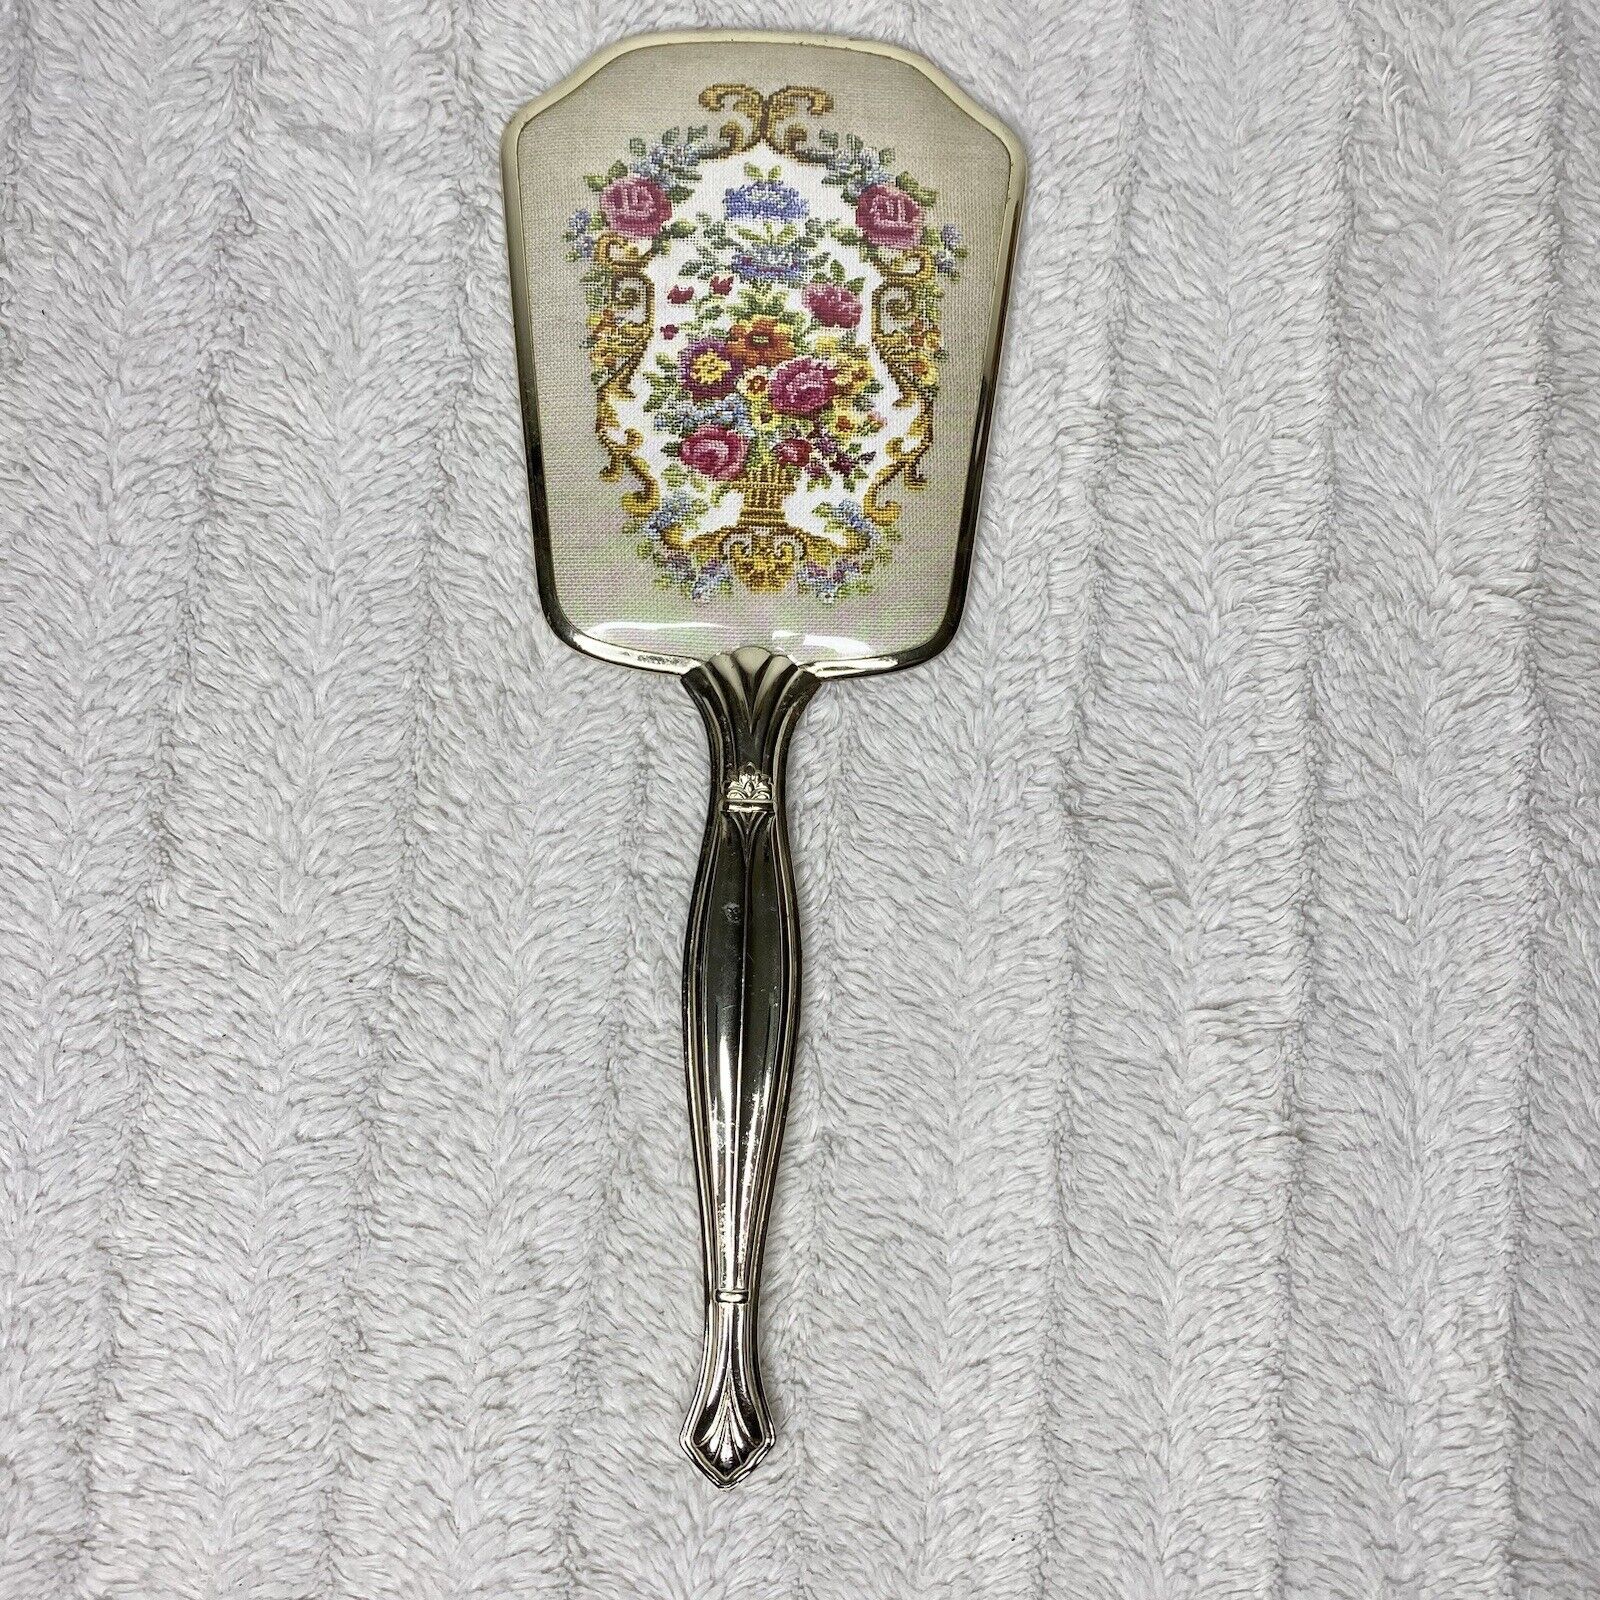 Vintage Vanity Mirror With Floral Design  And Gold Tone Cottagecore Shabby Chic